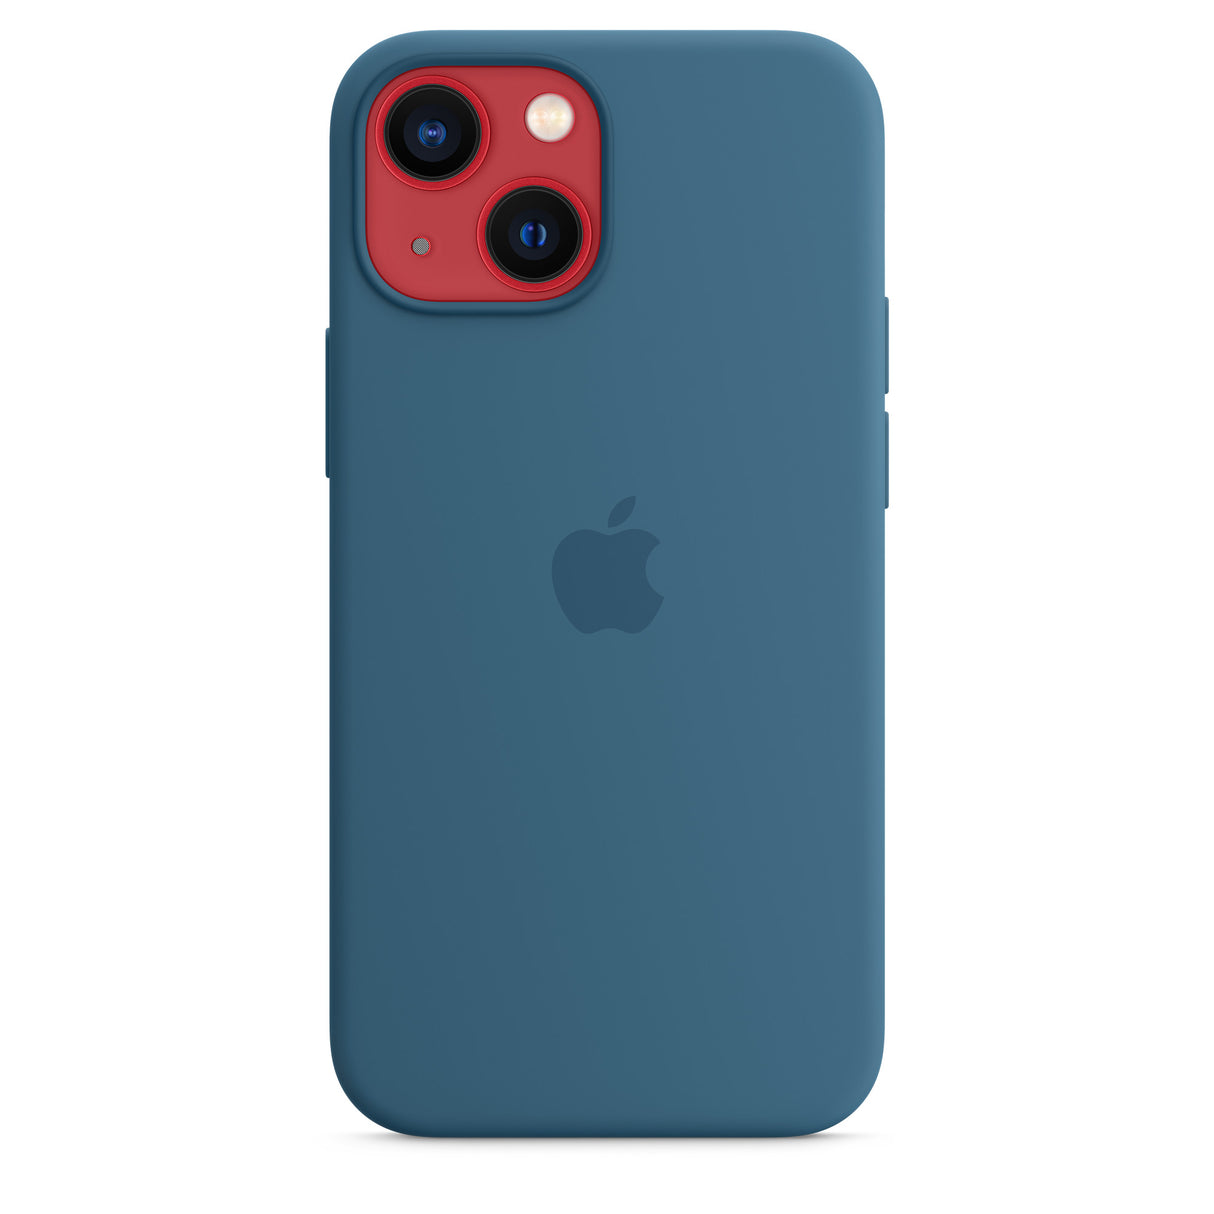 iPhone 13 mini Silicone Case with MagSafe - Blue Jay OB